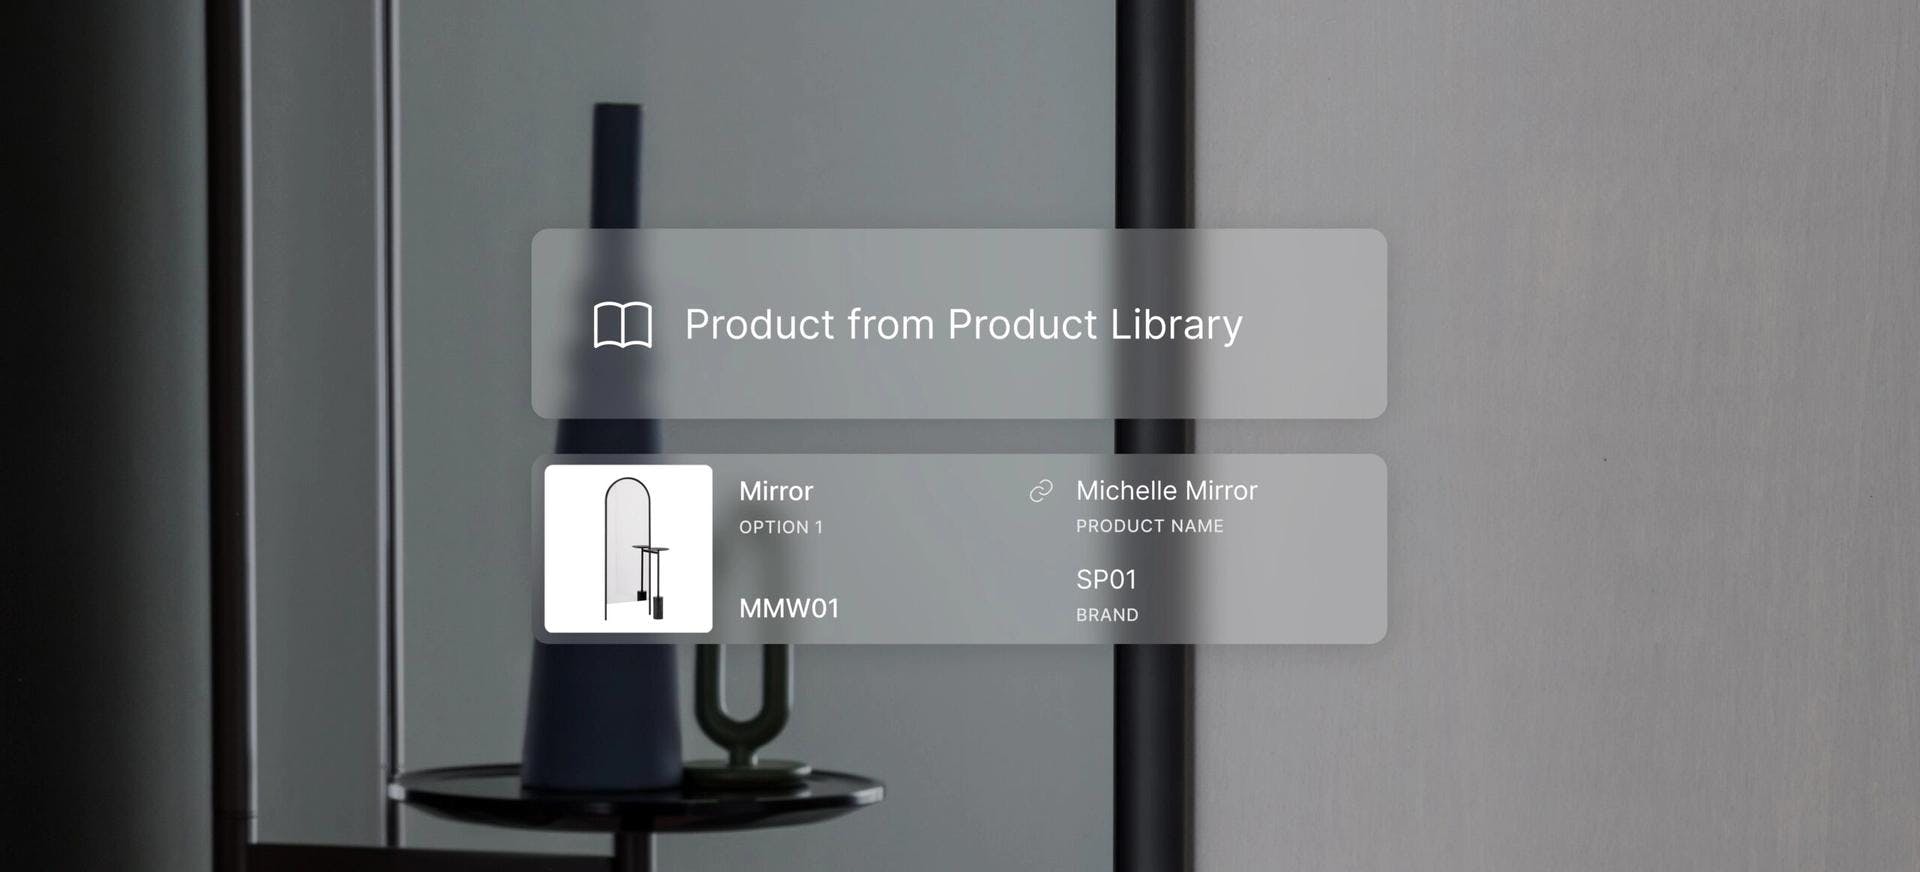 Seamlessly integrate your Product Library with your Schedules